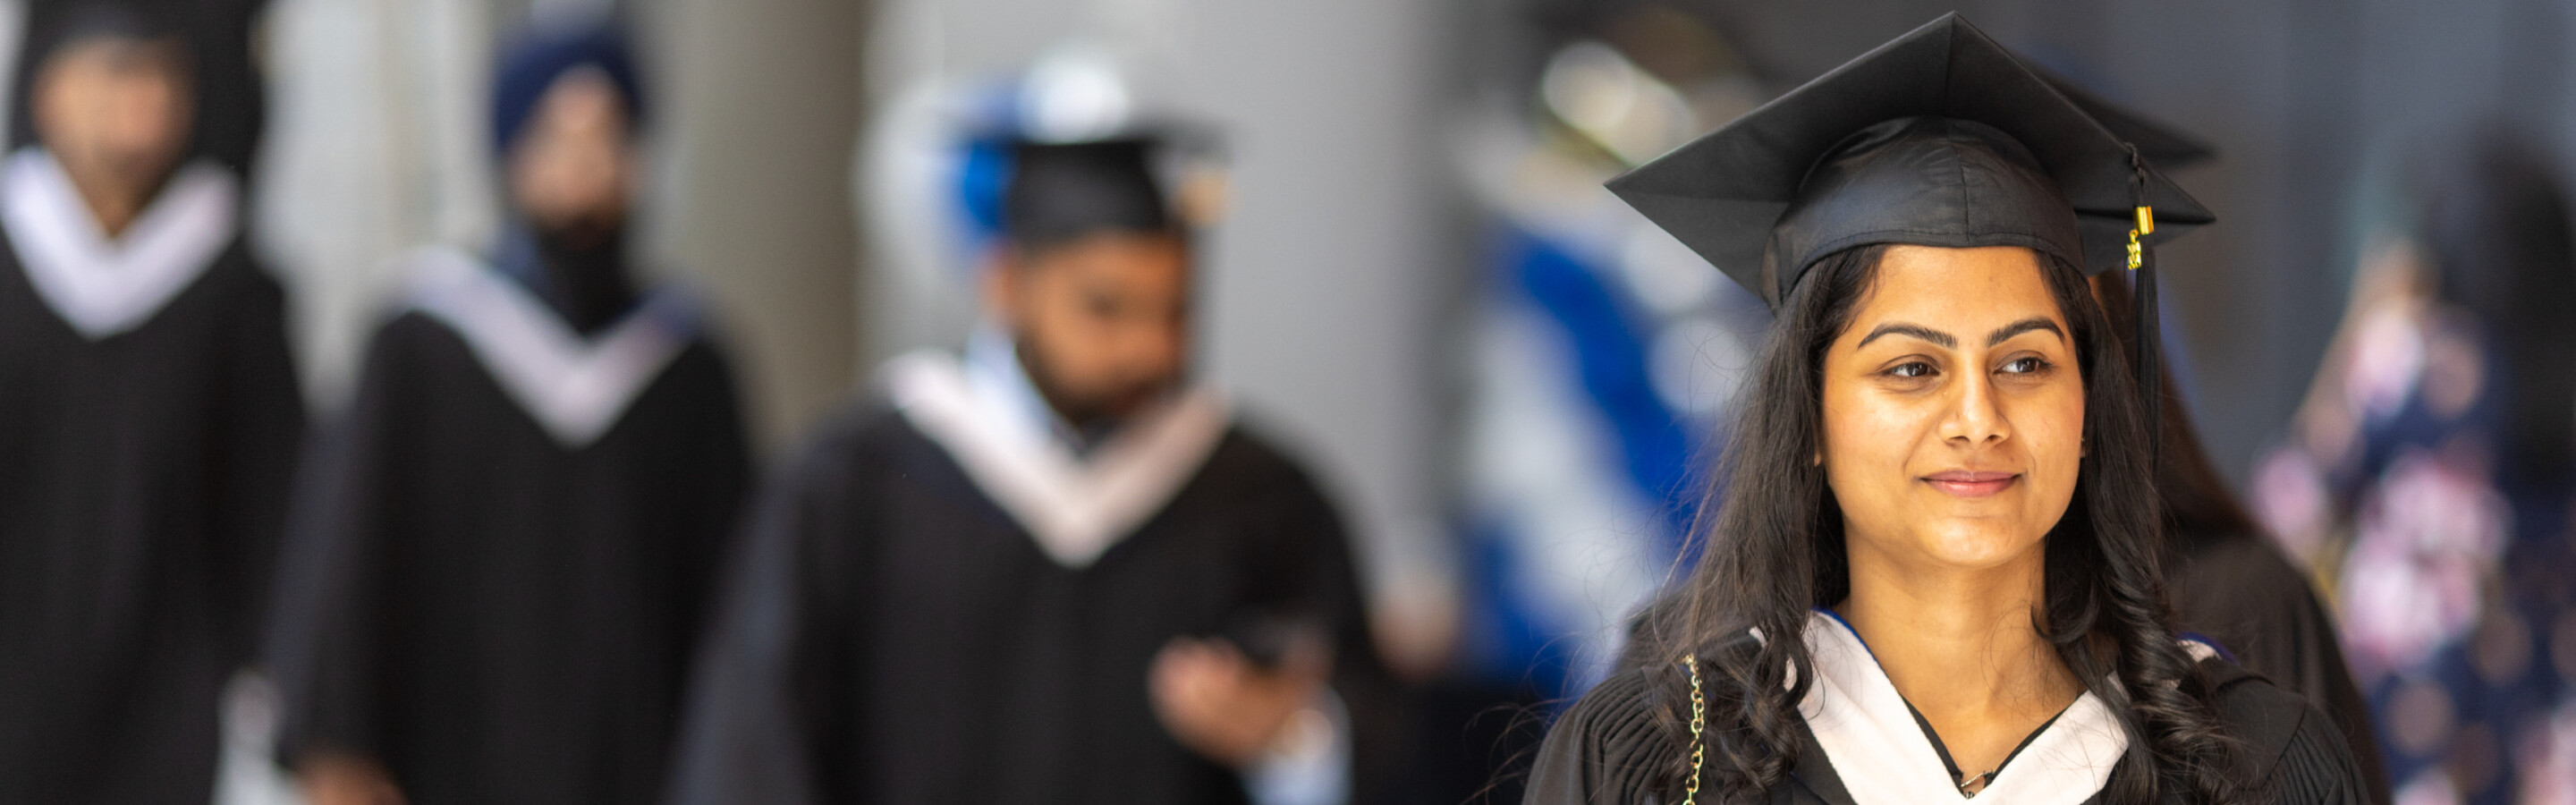 Female graduate walking in her cap and gown